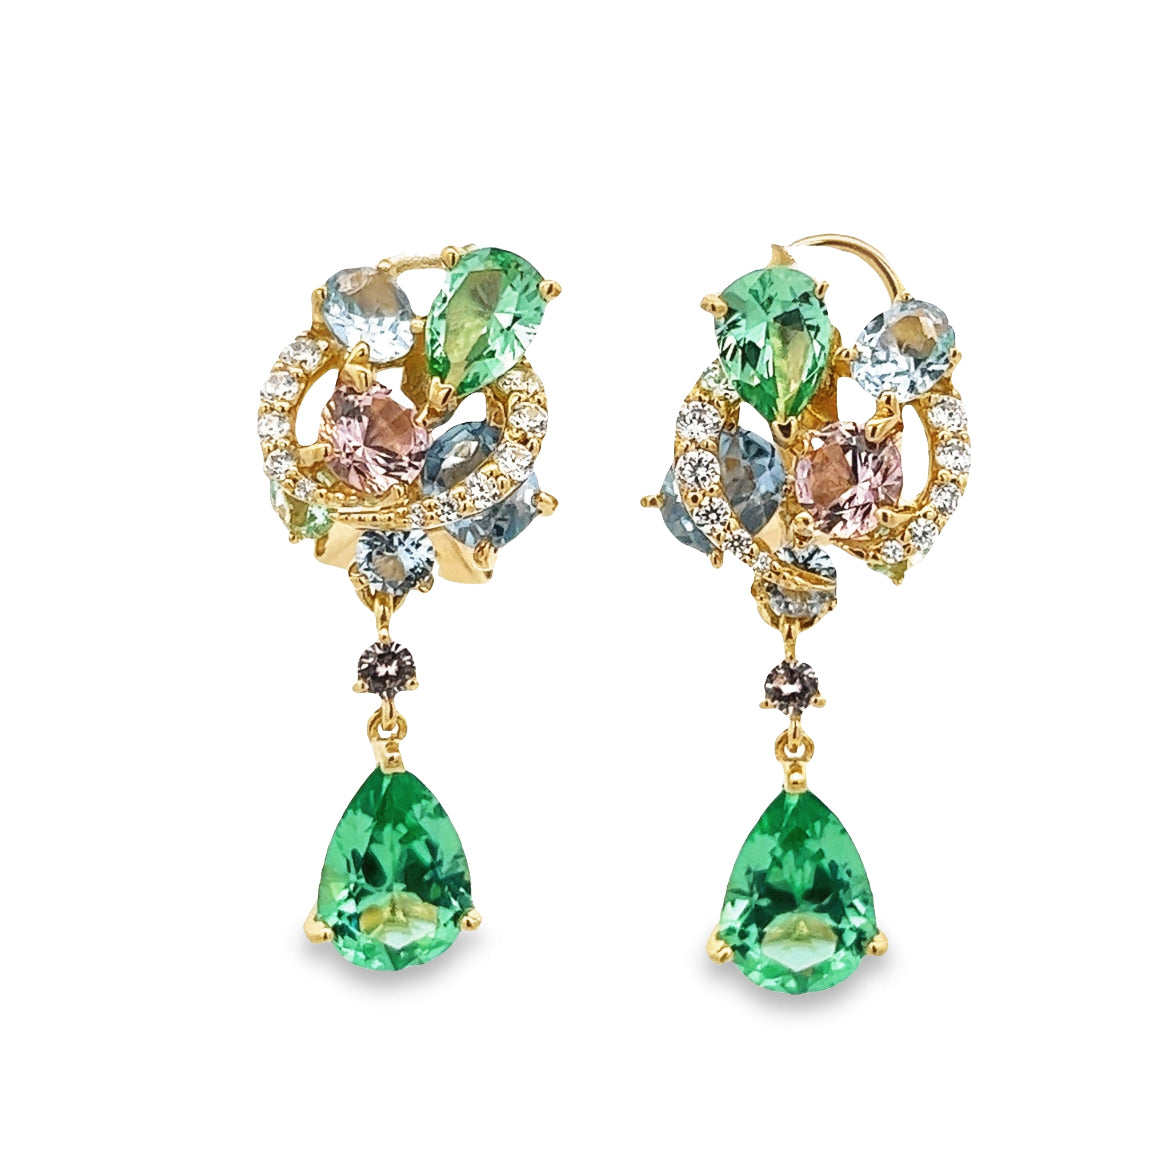 925 SIVER GOLD PLATED EARRINGS WITH TOURMALINE AND GREEN AQUABLUE MAGANITE PINK